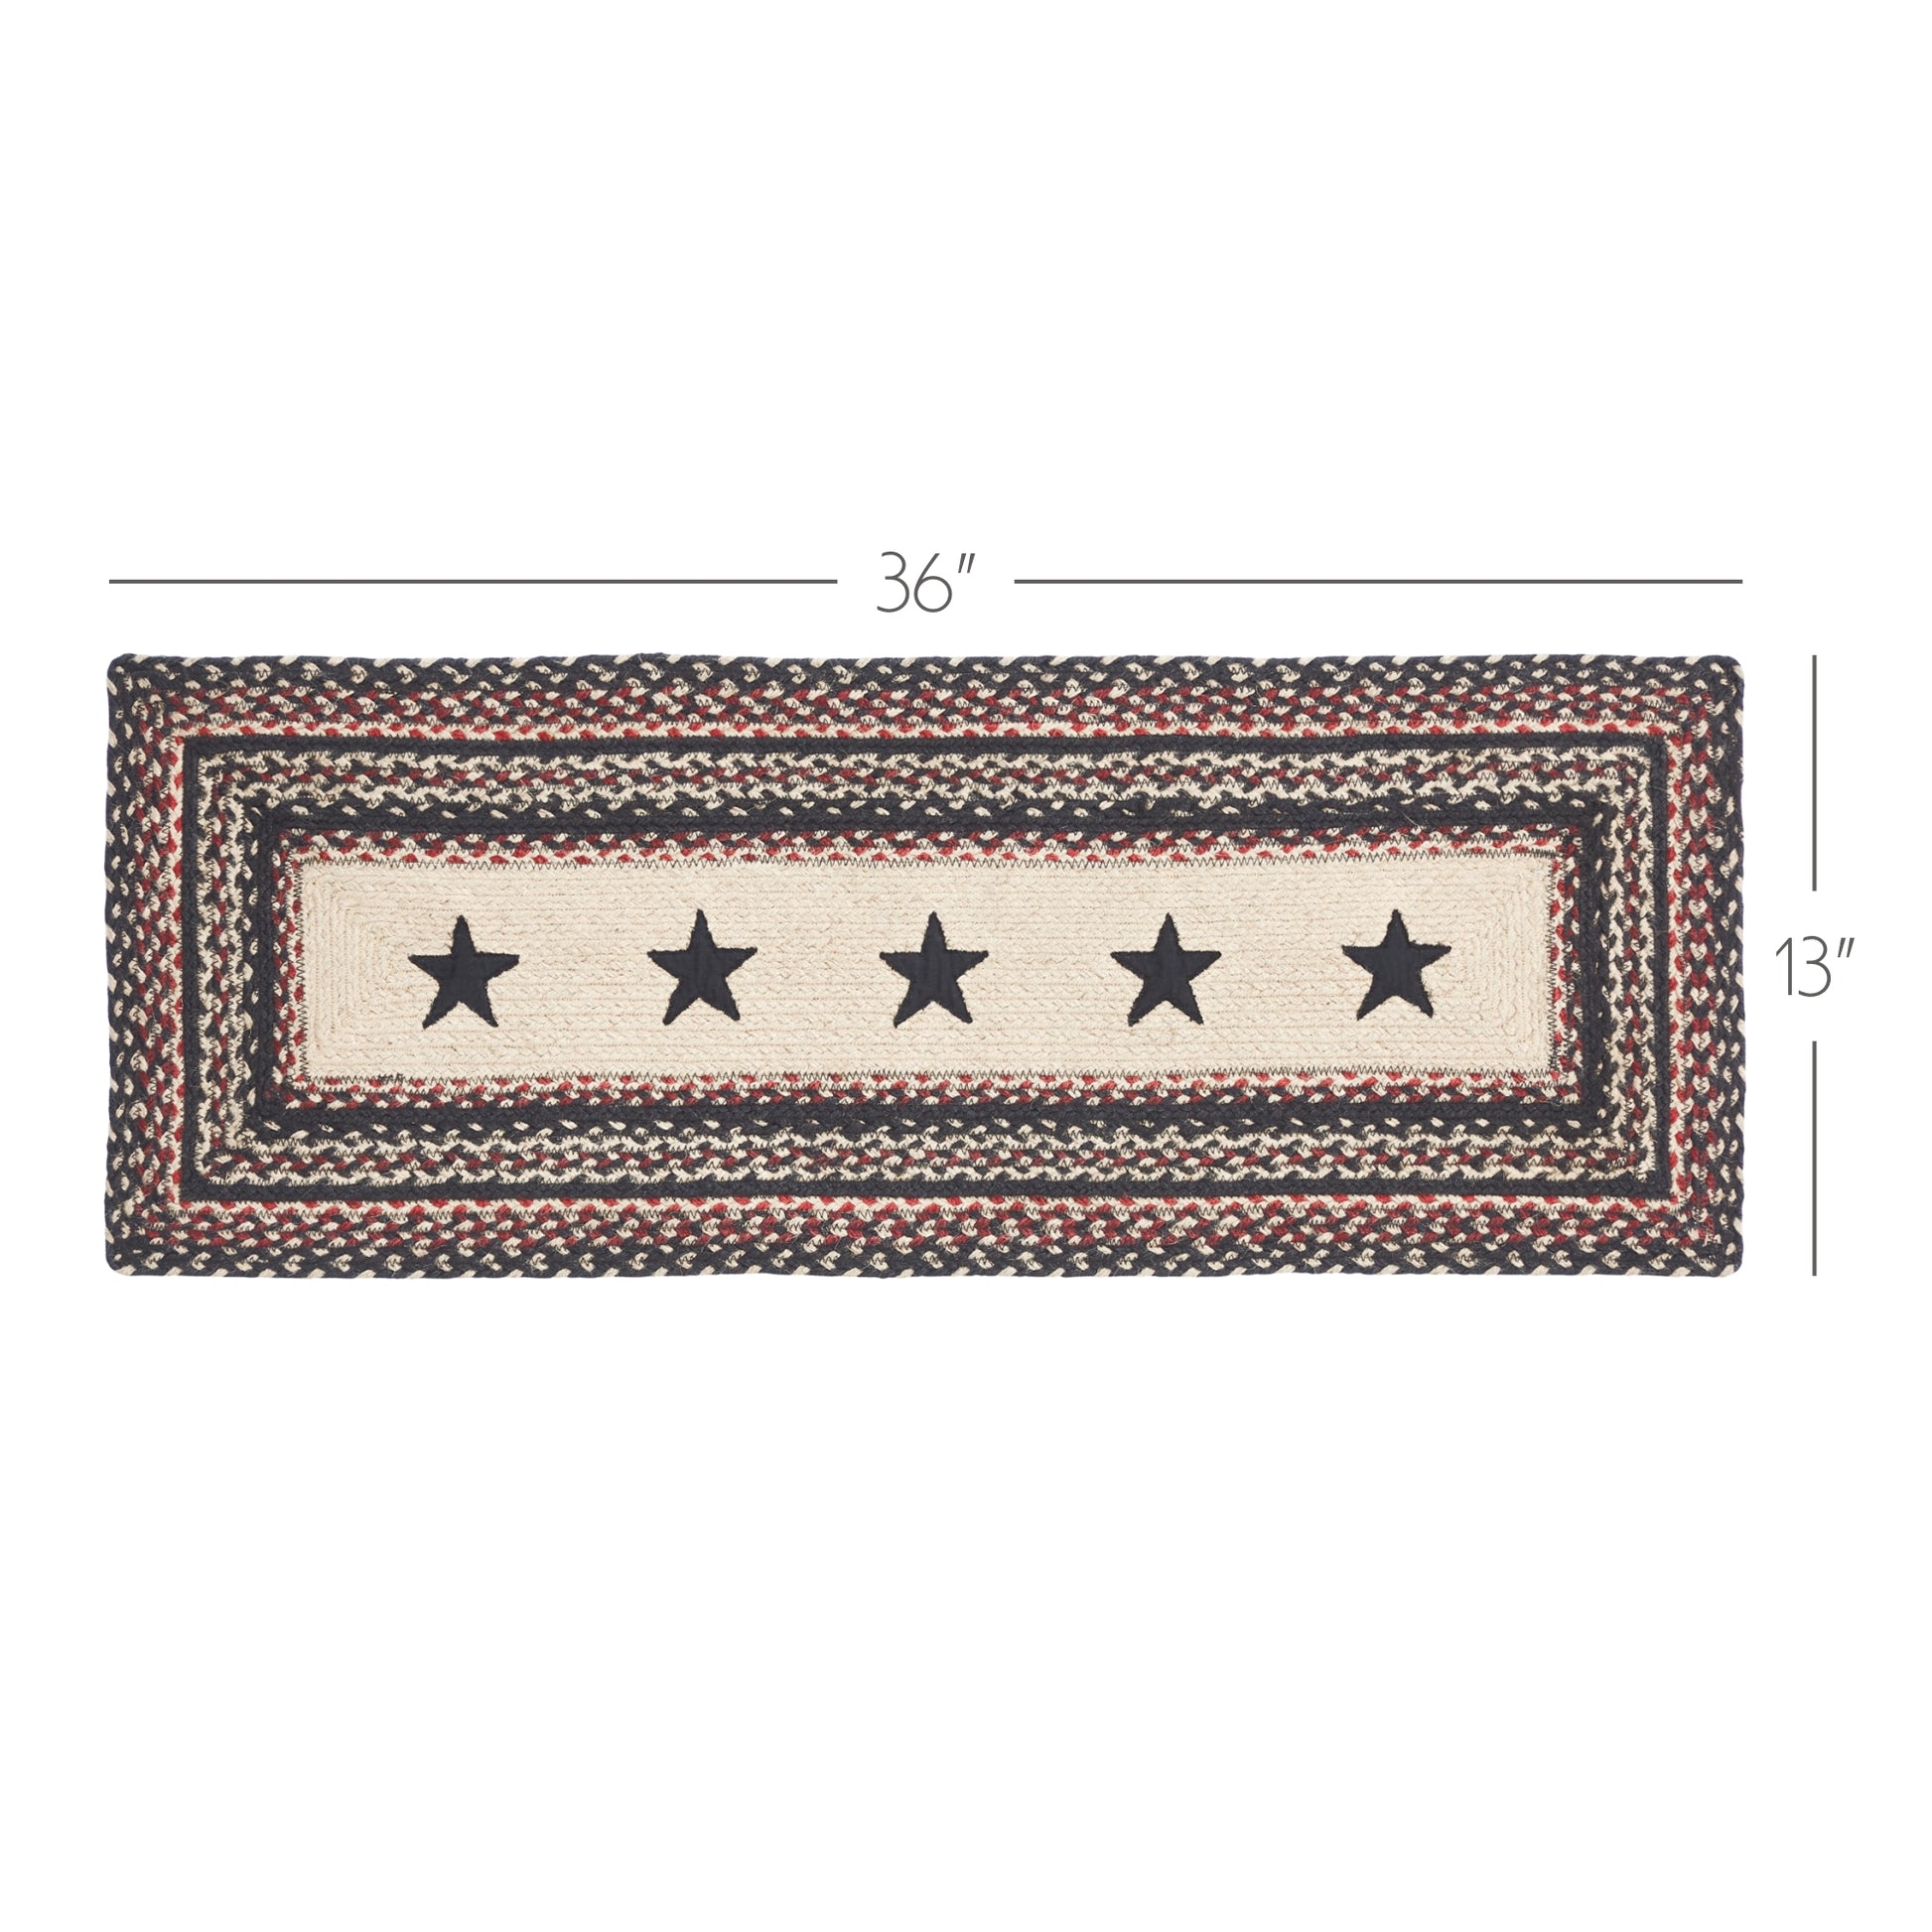 67026-Colonial-Star-Jute-Rect-Runner-13x36-image-1